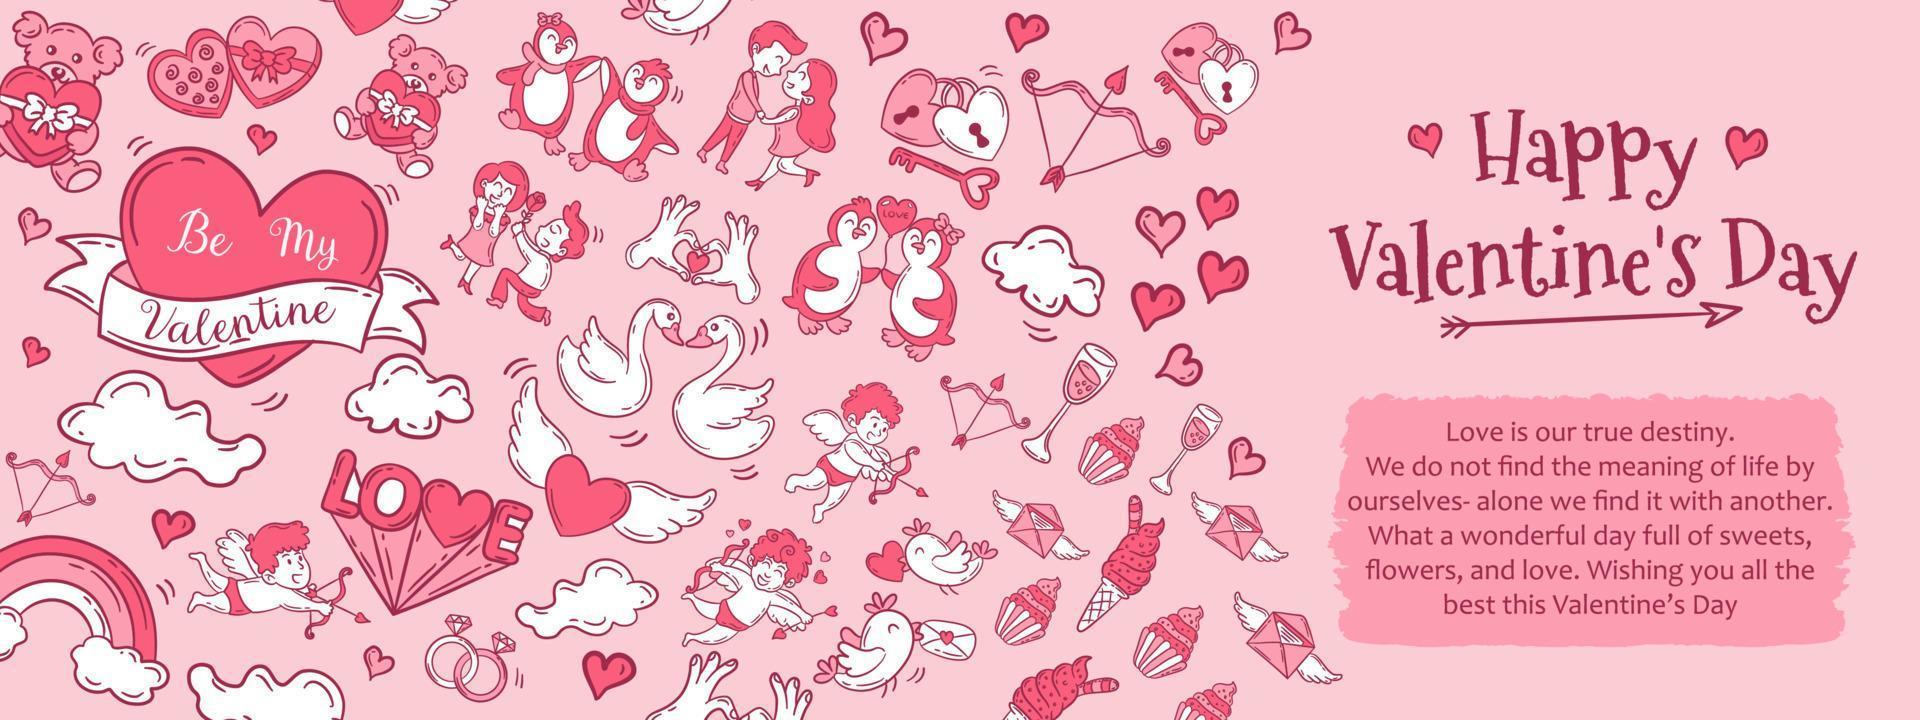 Valentine's day horizontal banners illustration. Background template for Valentine's Day celebration vector